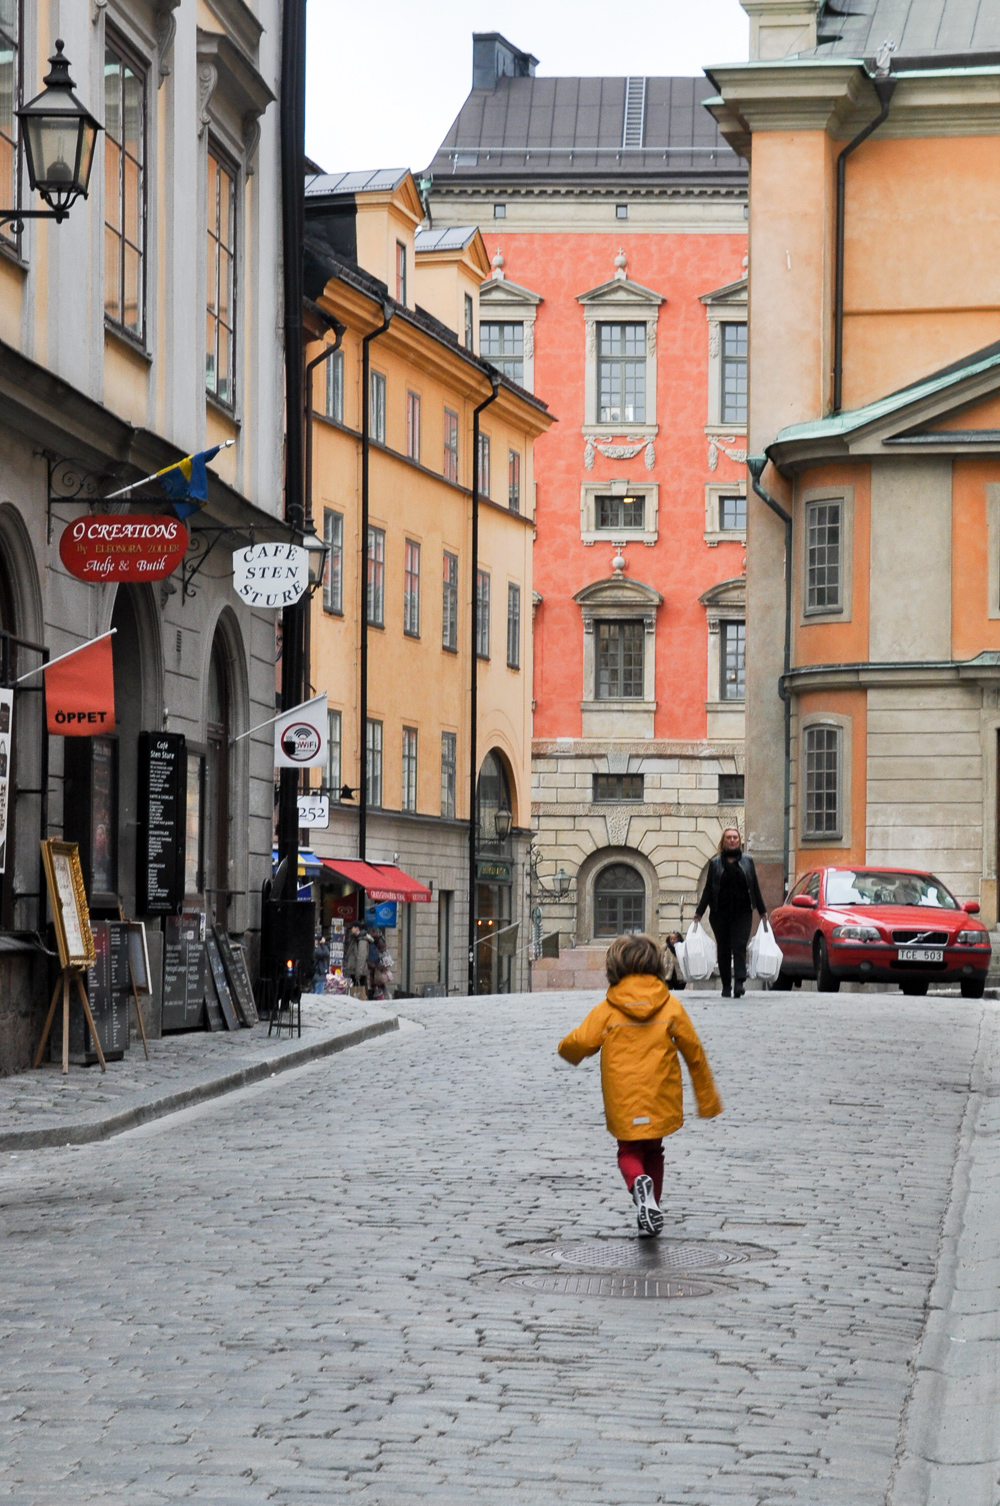  Gamla Stan, Stockholm's old town.